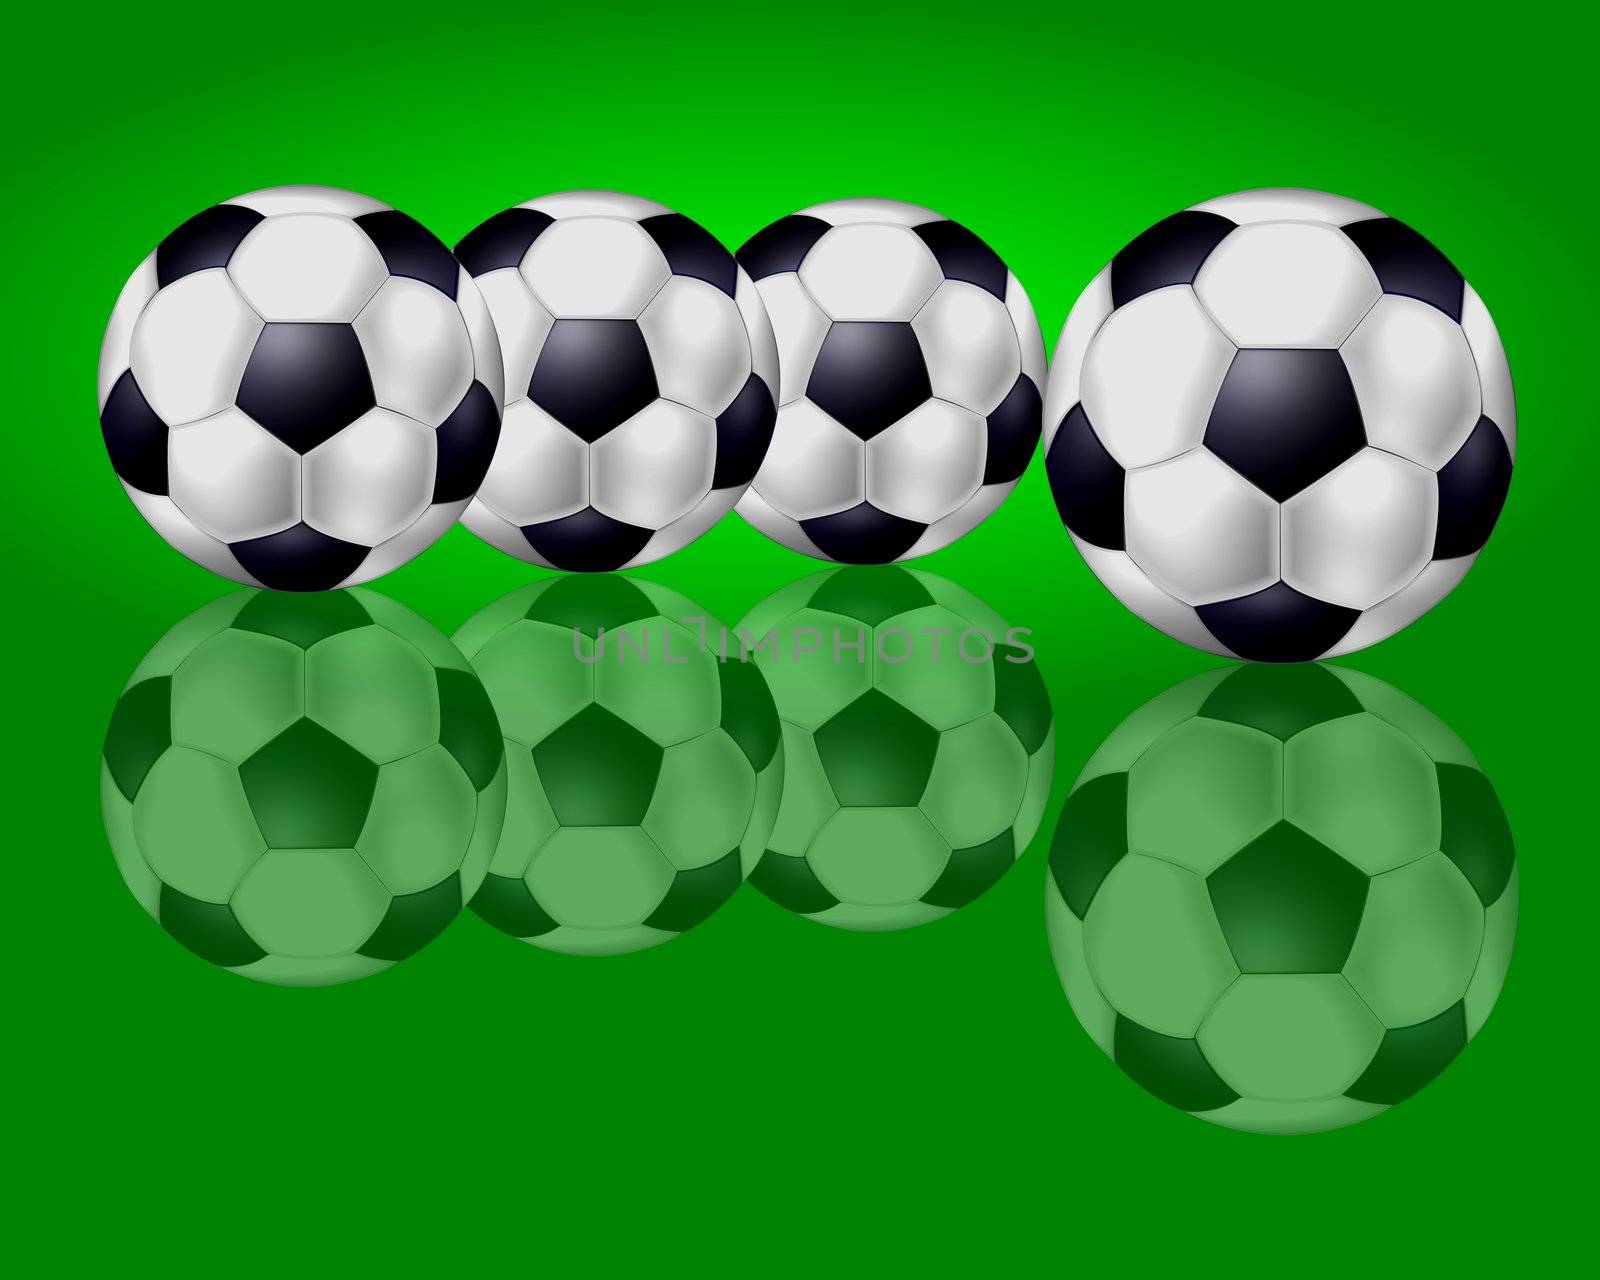 4 soccer balls on green background by peromarketing